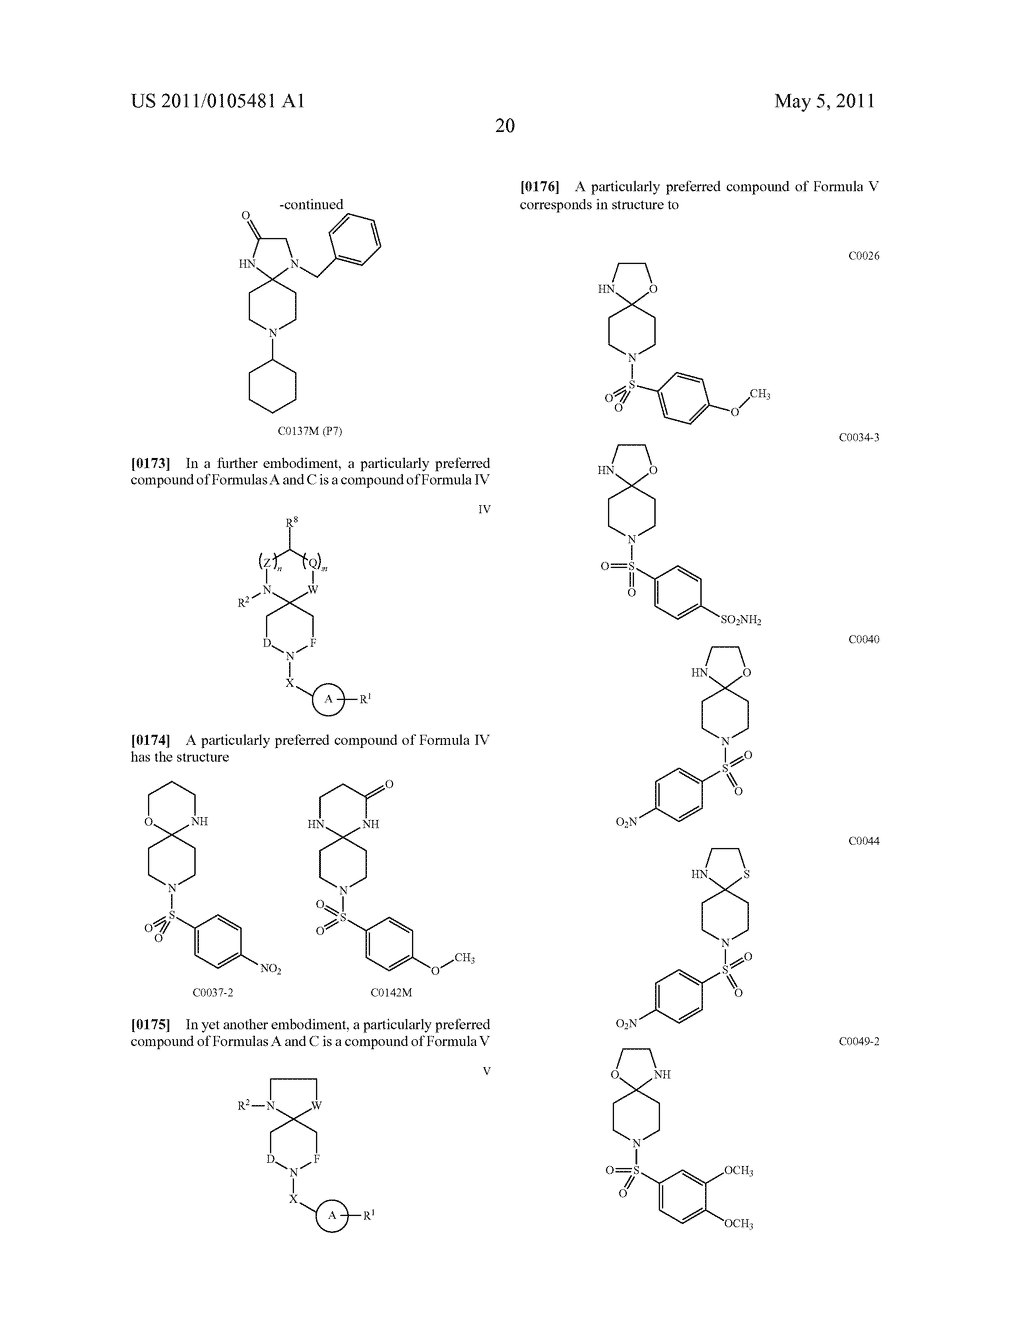 FILAMIN A BINDING ANTI-INFLAMMATORY AND ANALGESIC - diagram, schematic, and image 21